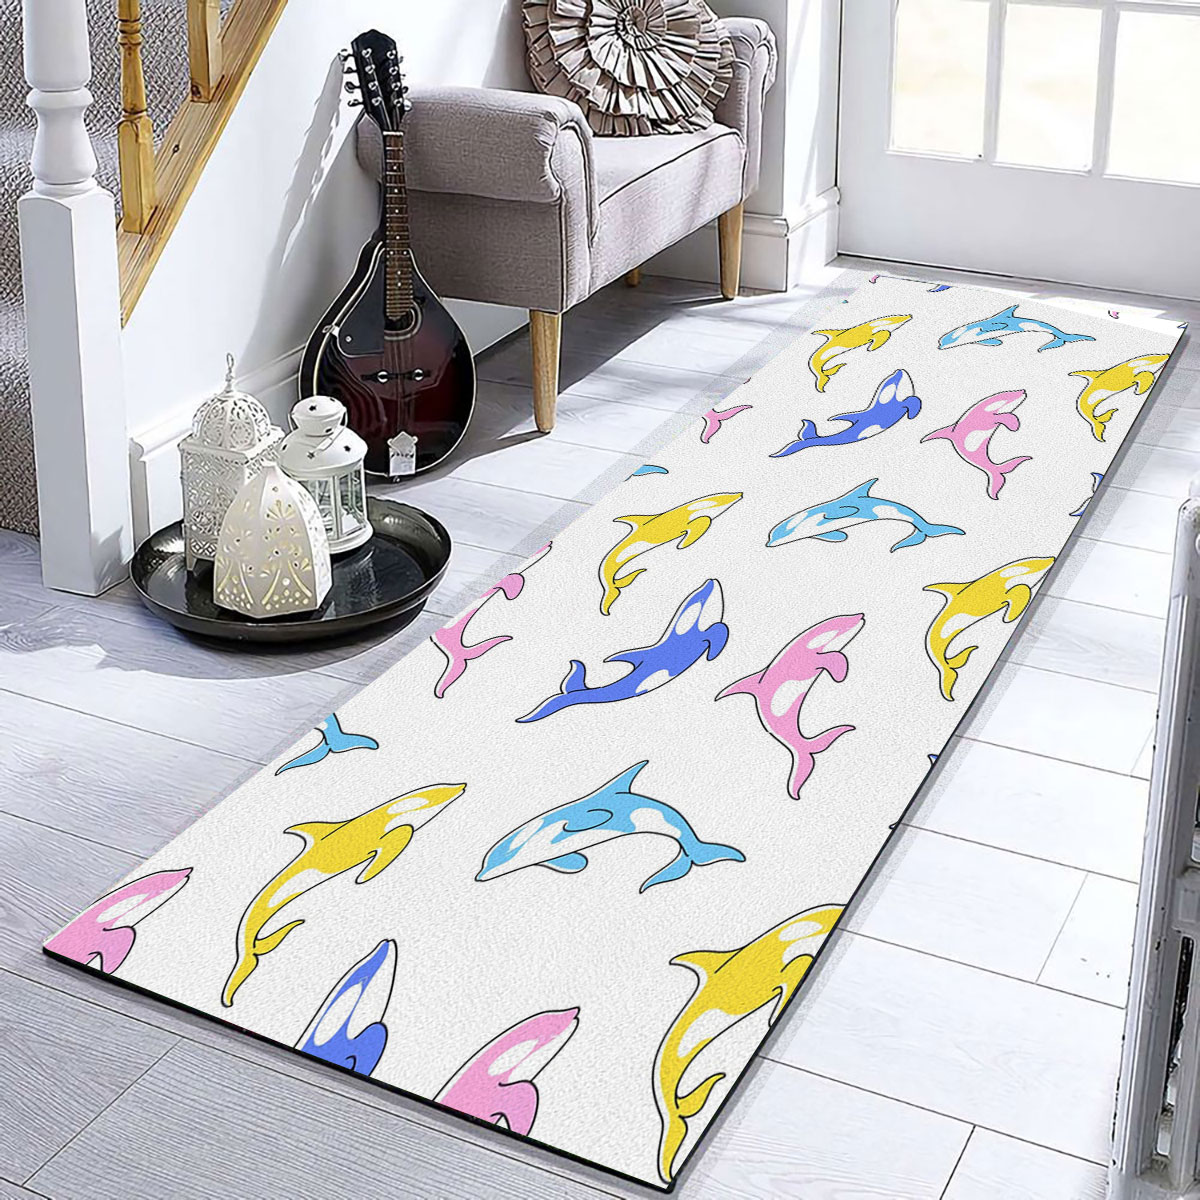 Colorful Orca Whale Runner Carpet